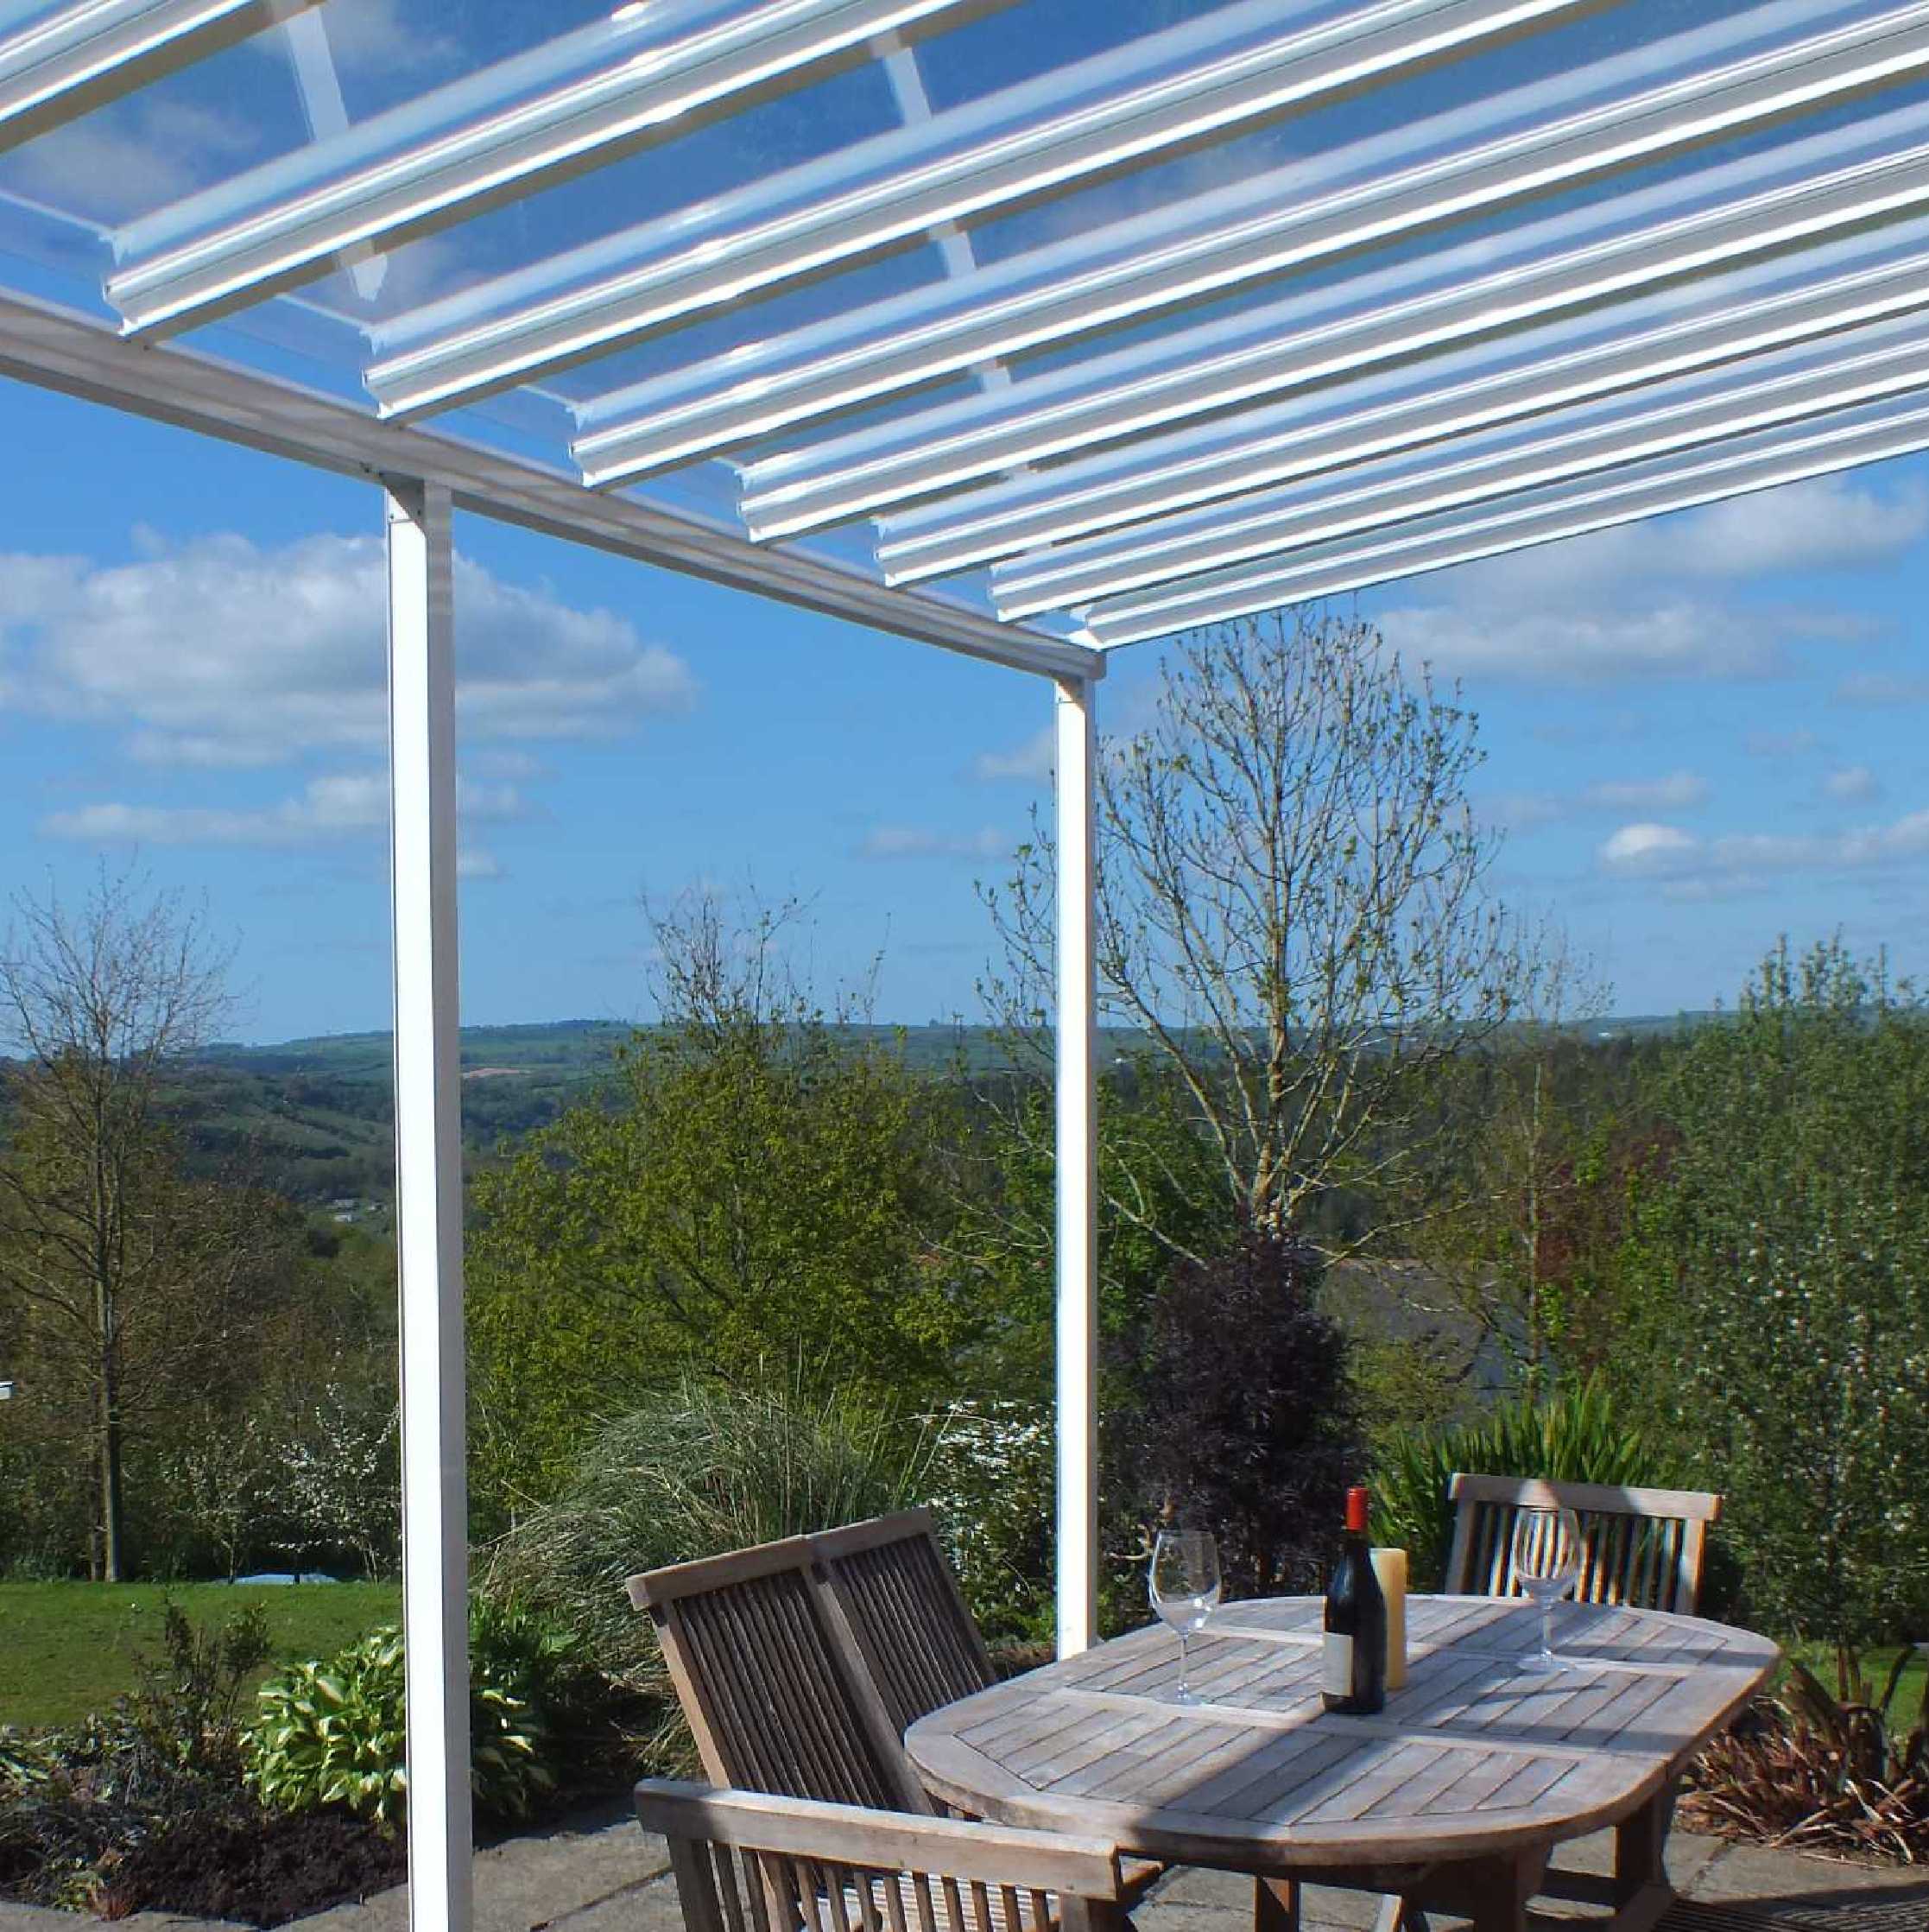 Buy Omega Smart Lean-To Canopy, White with 6mm Glass Clear Plate Polycarbonate Glazing - 9.8m (W) x 1.5m (P), (5) Supporting Posts online today